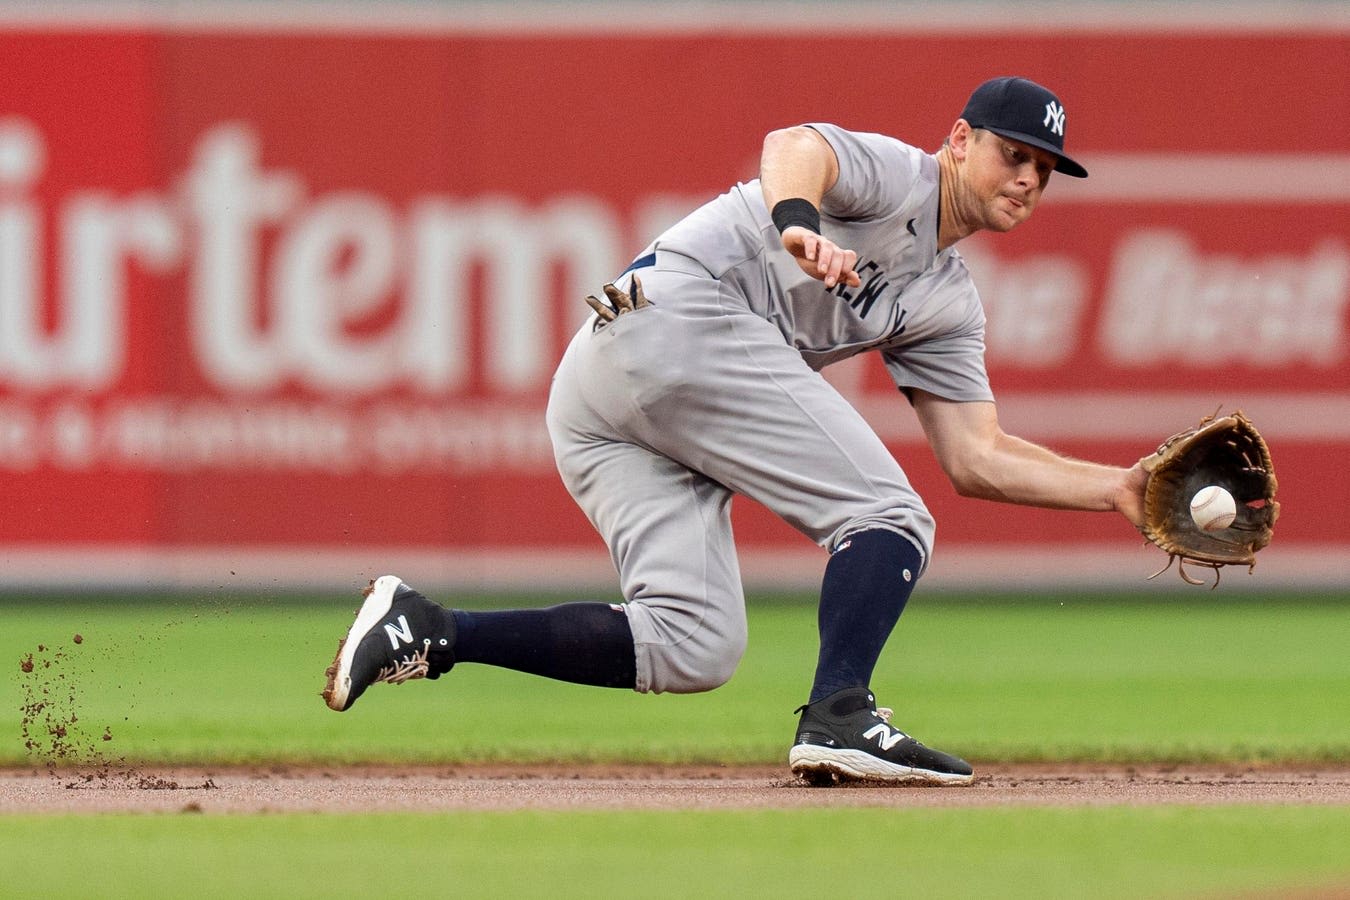 New York Yankees Hoping DJ LeMahieu’s Struggles Are Not The New Normal